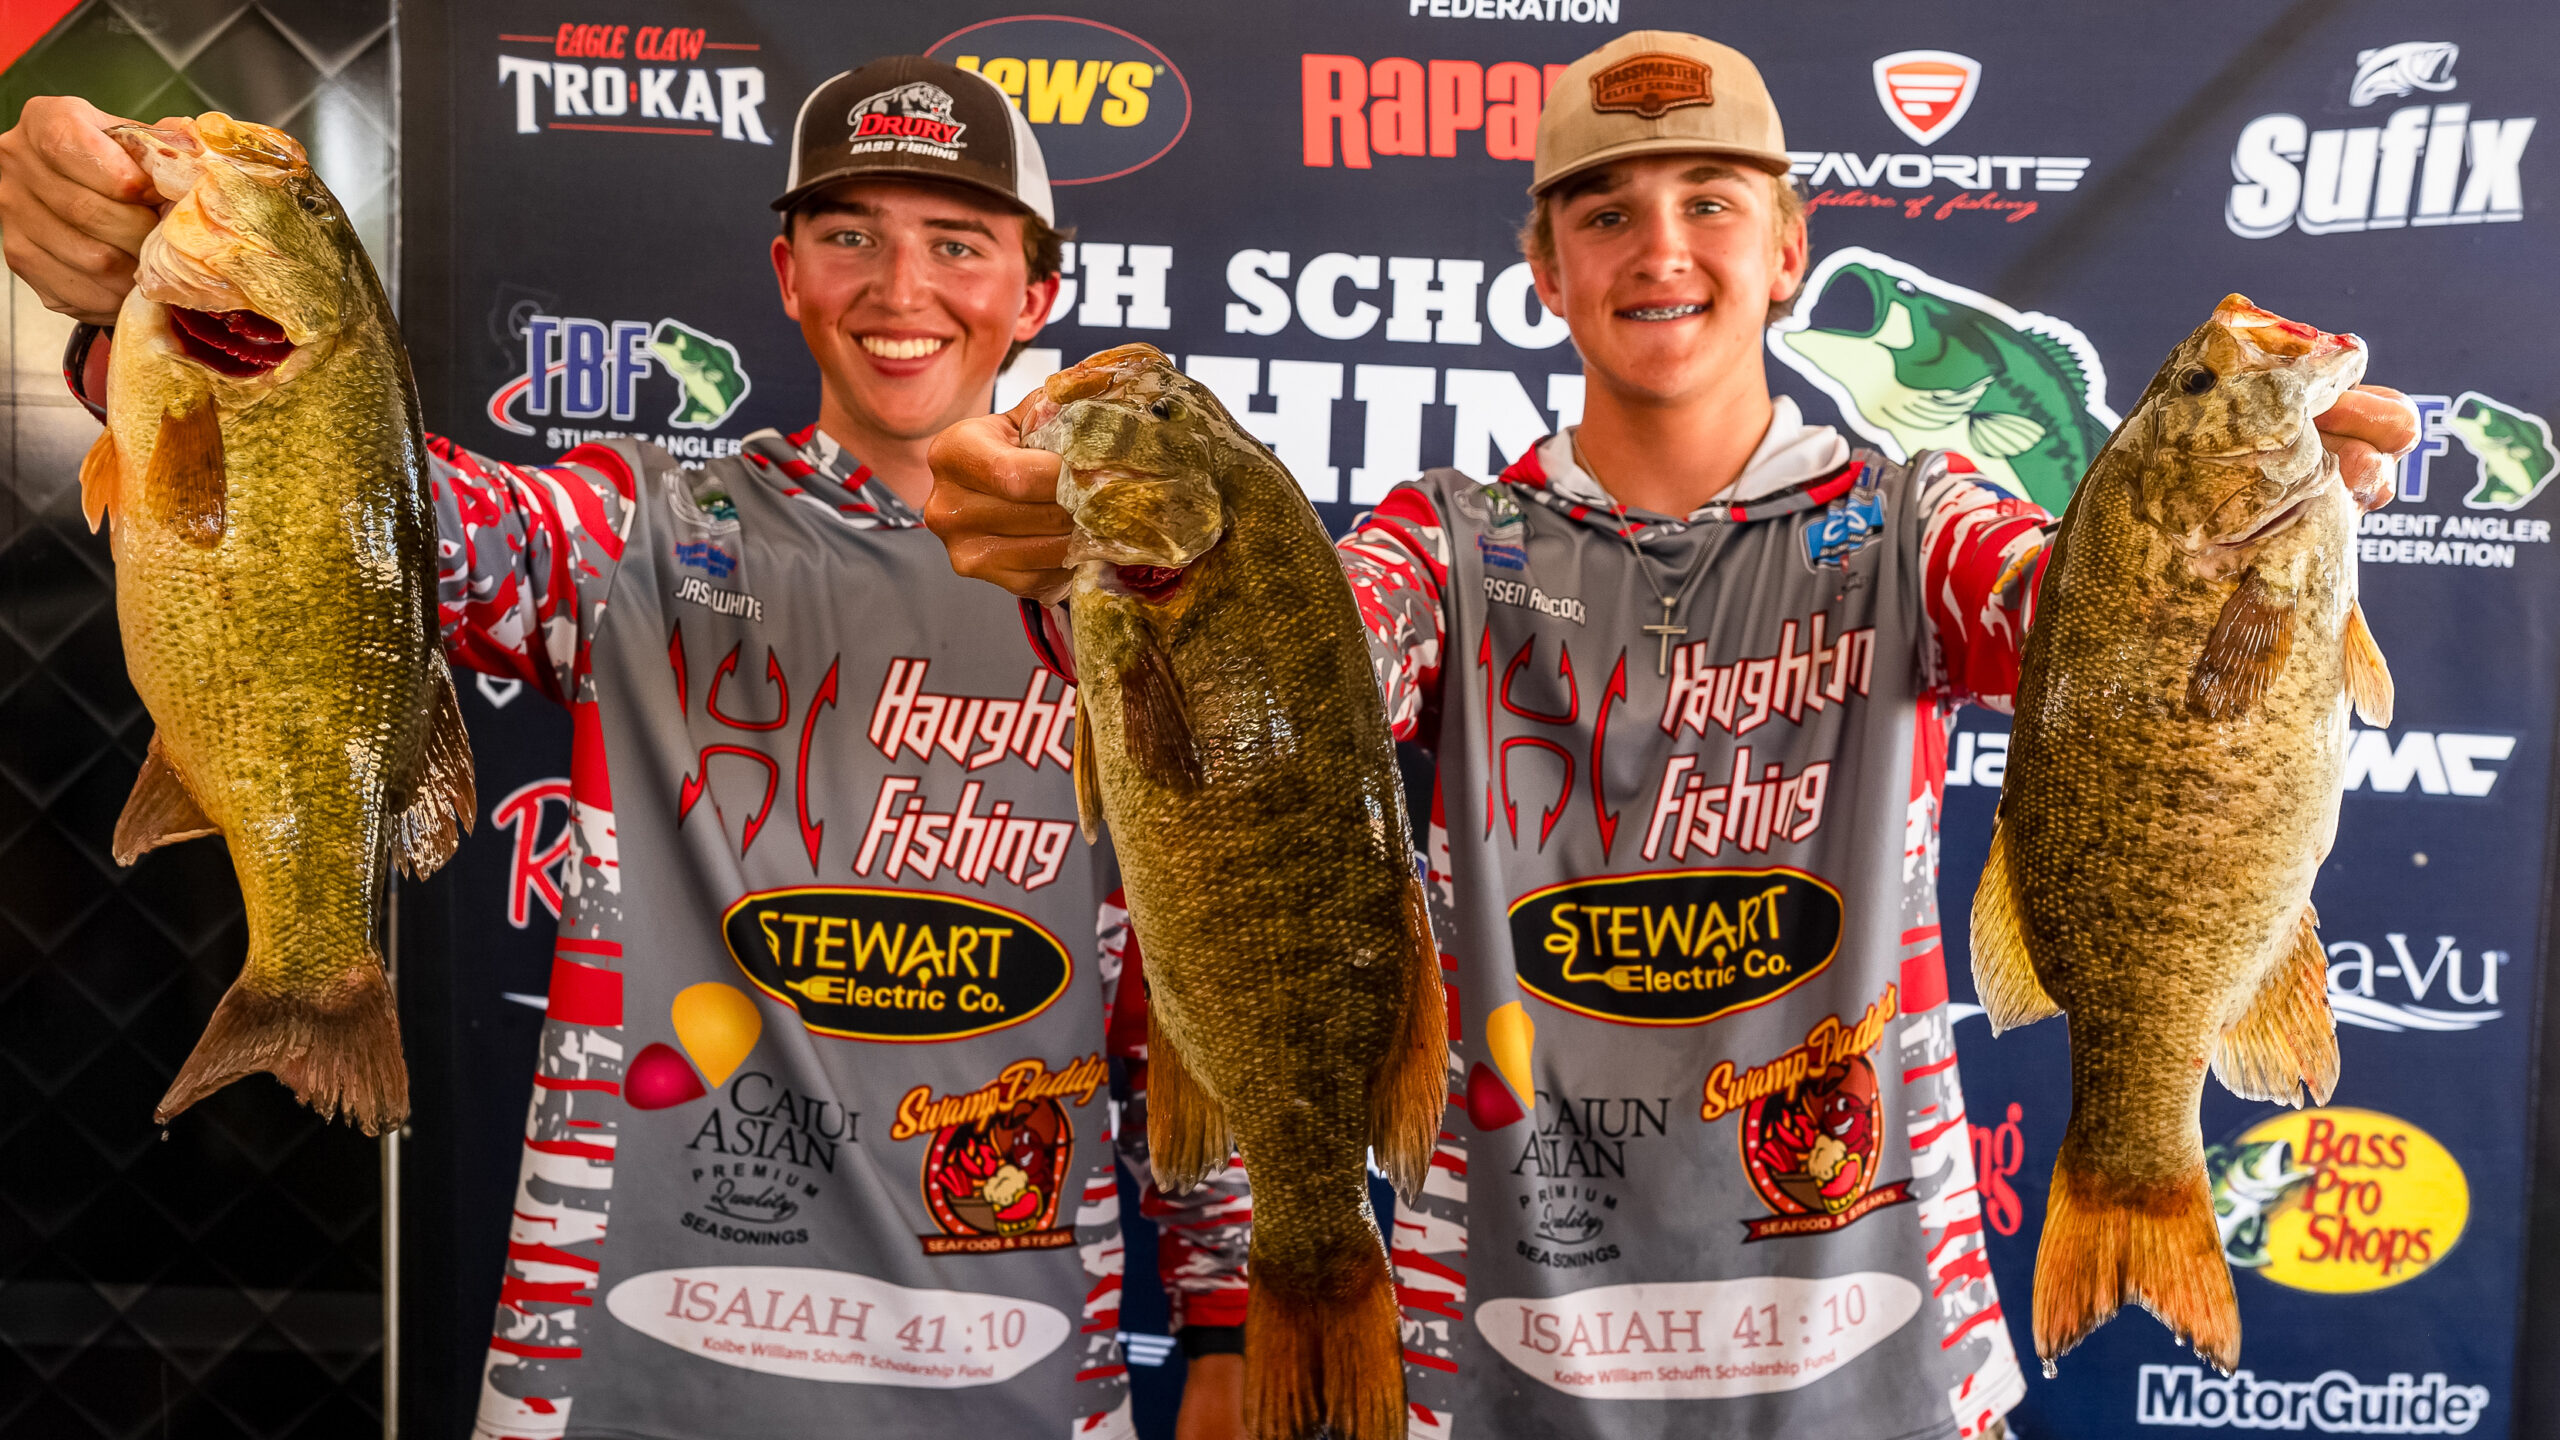 High School Fishing World Finals and National Championship – Day 3